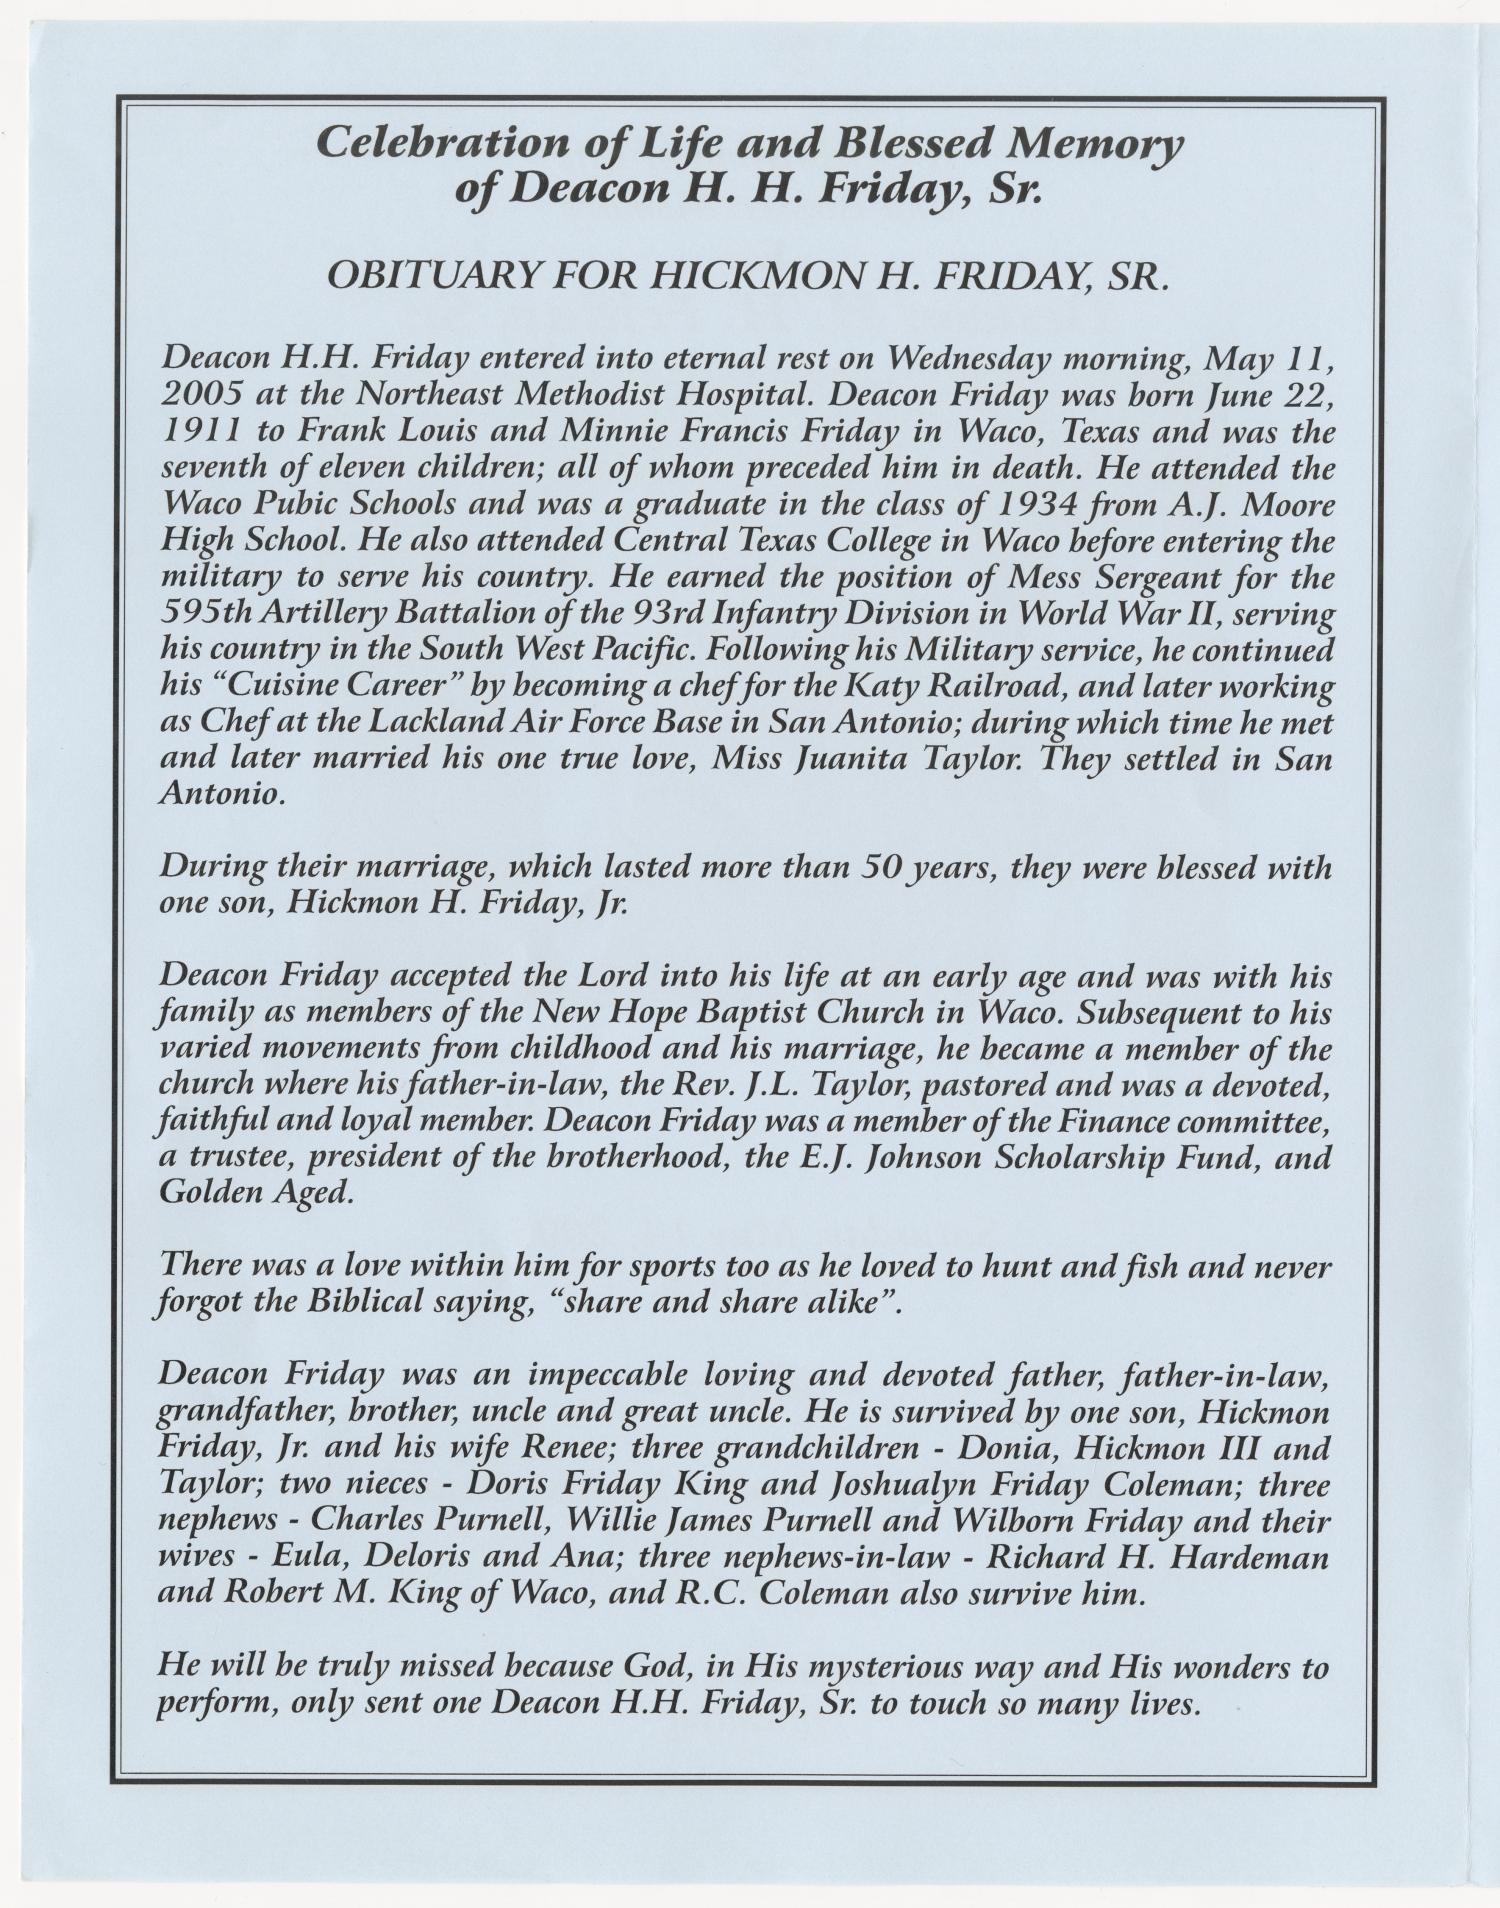 [Funeral Program for Deacon H. H. Friday, Sr., May 14, 2005] Page 2